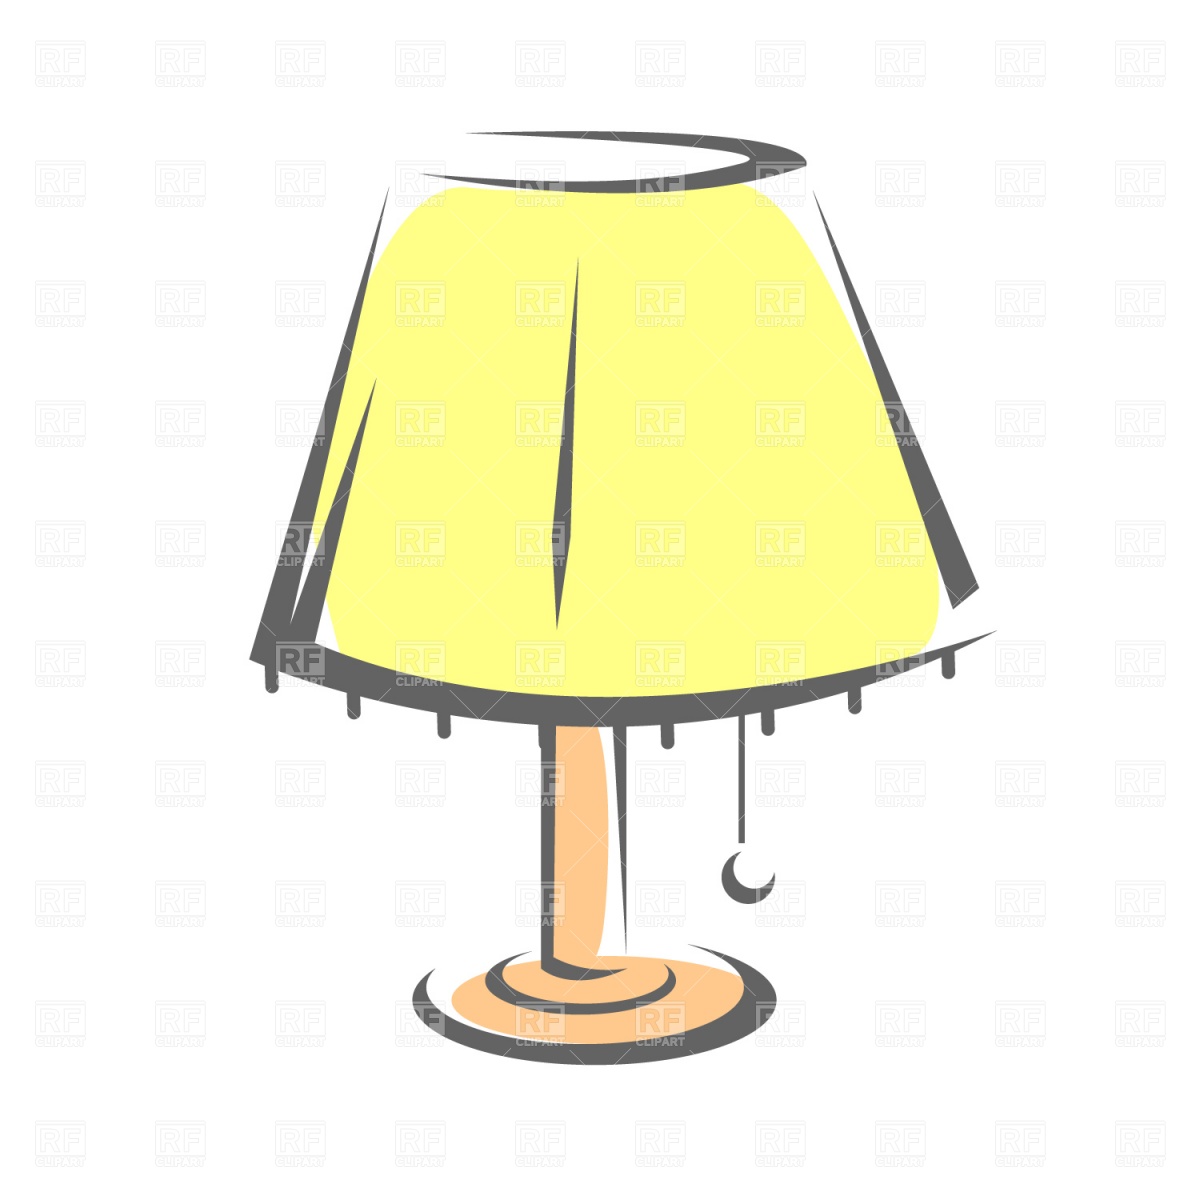 floor lamp clipart black and 